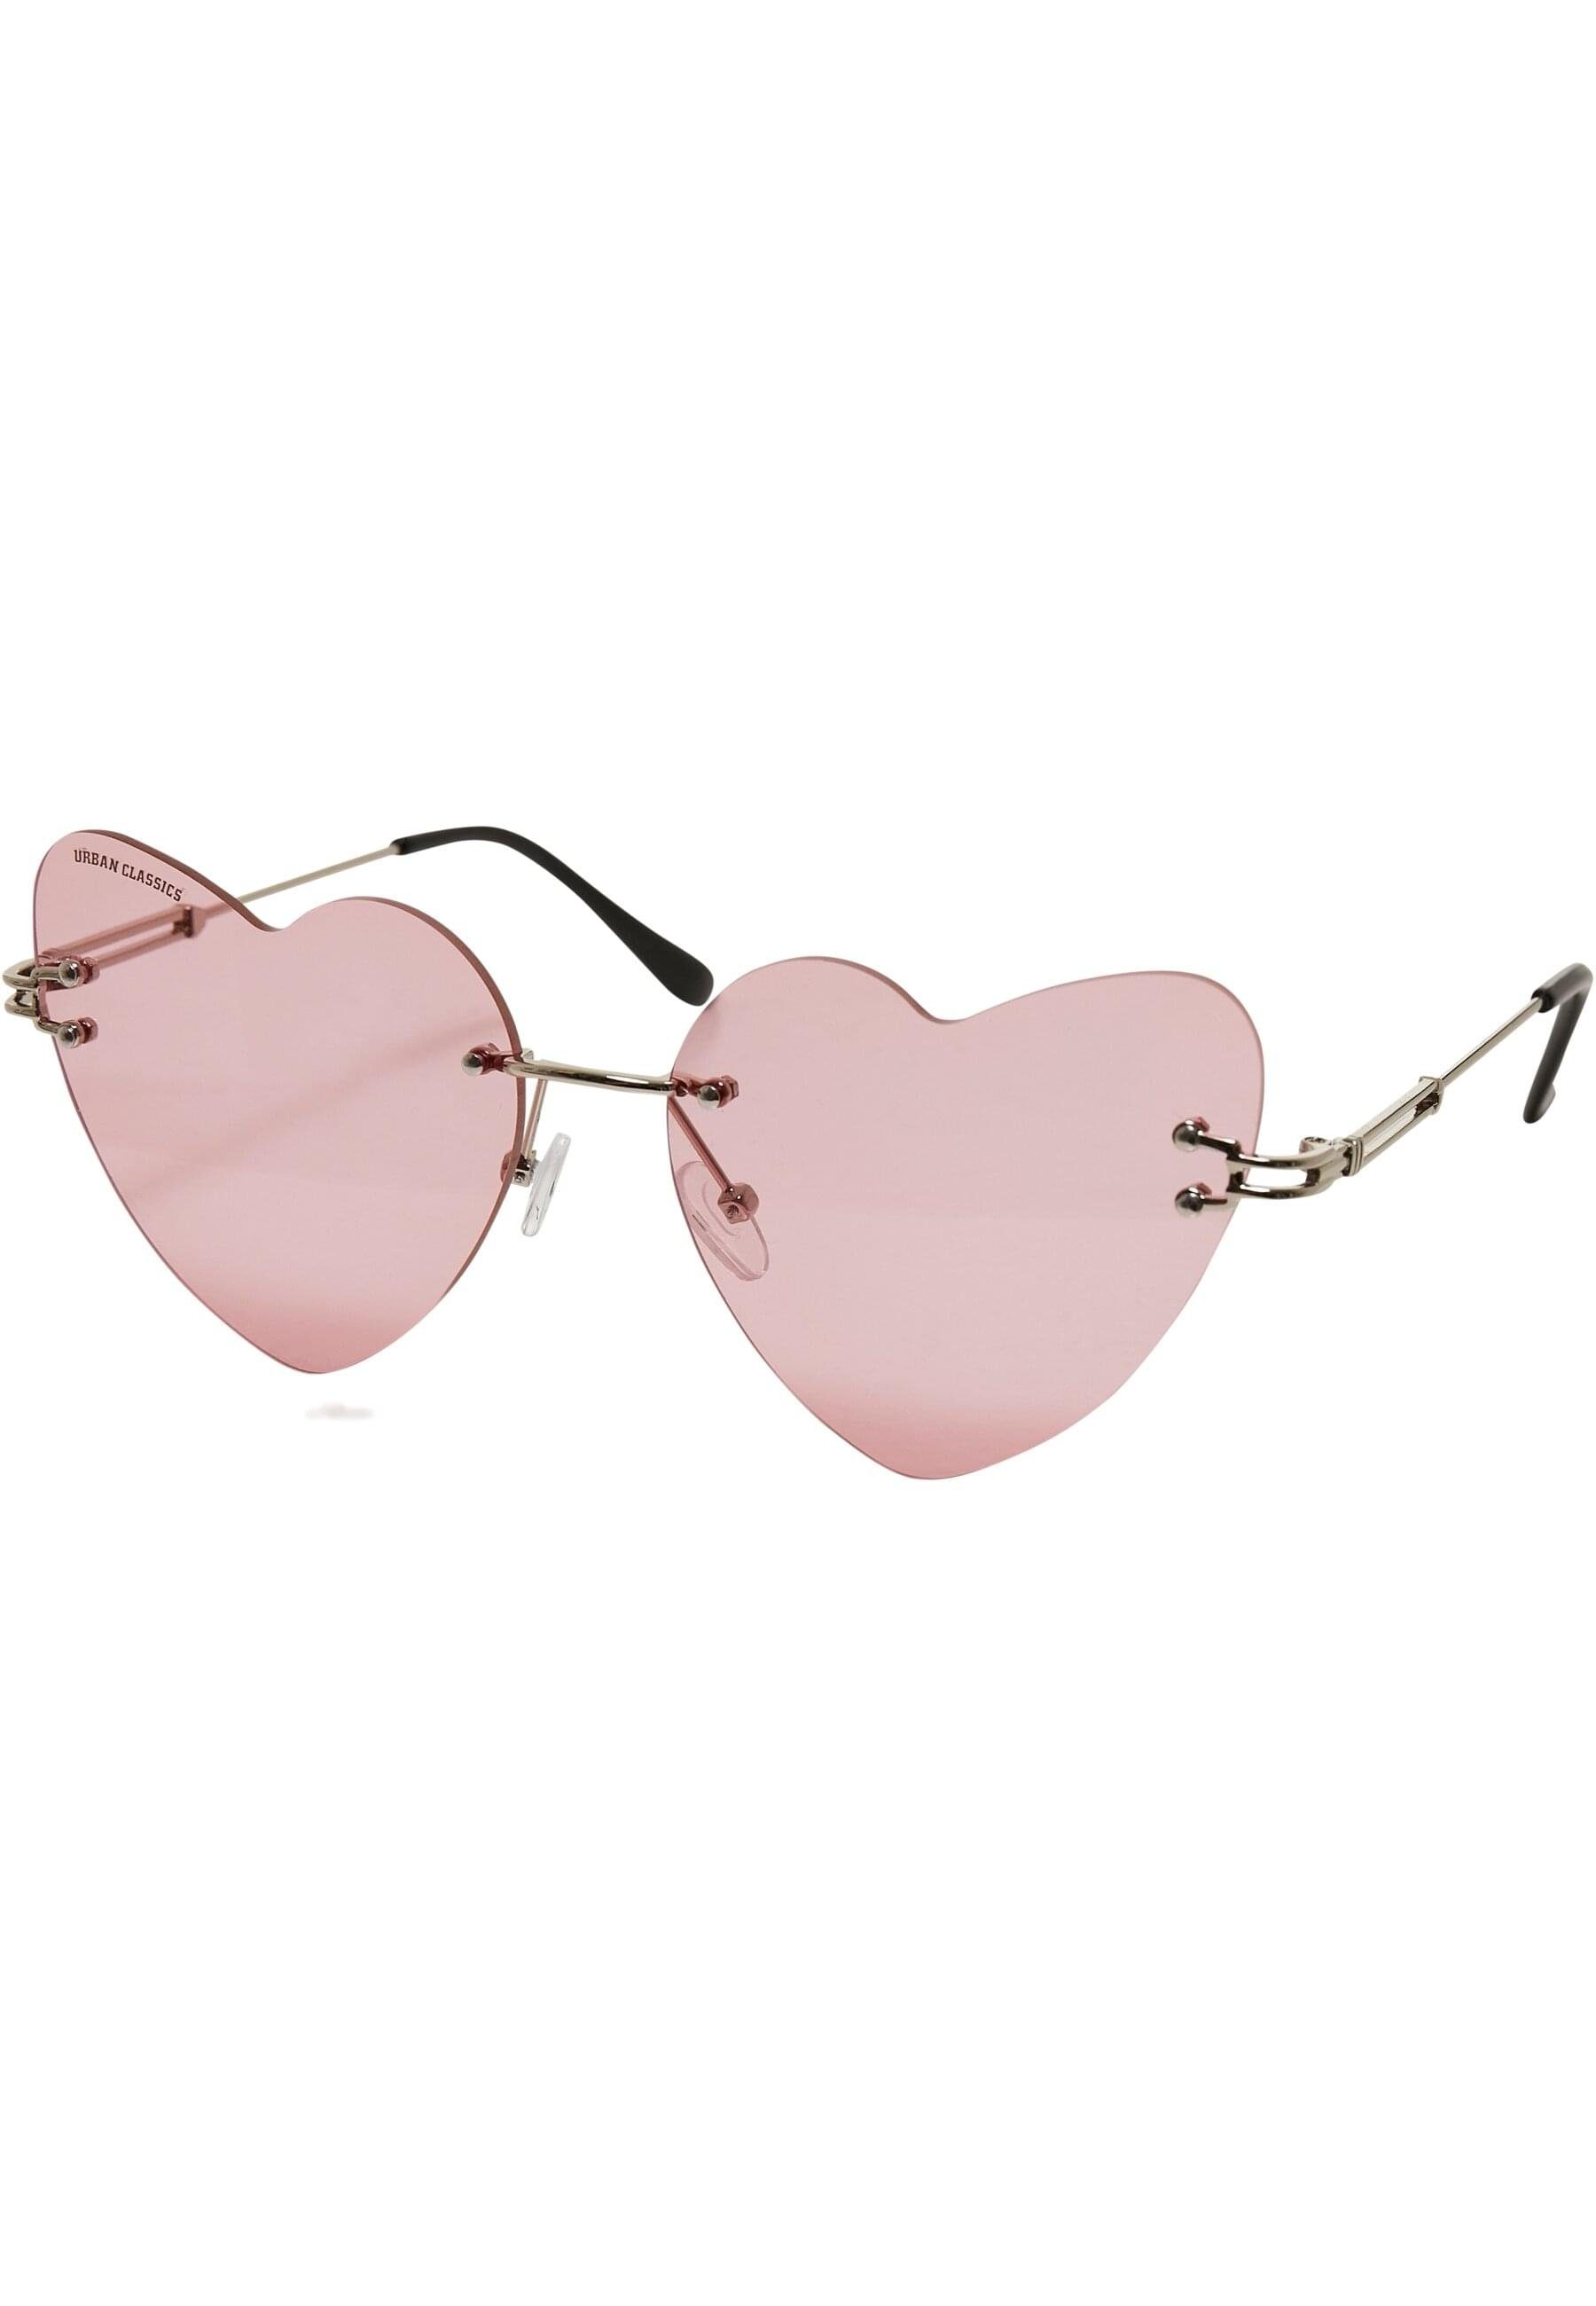 Sunglasses Heart CLASSICS With Sonnenbrille rose/silver Unisex URBAN Chain